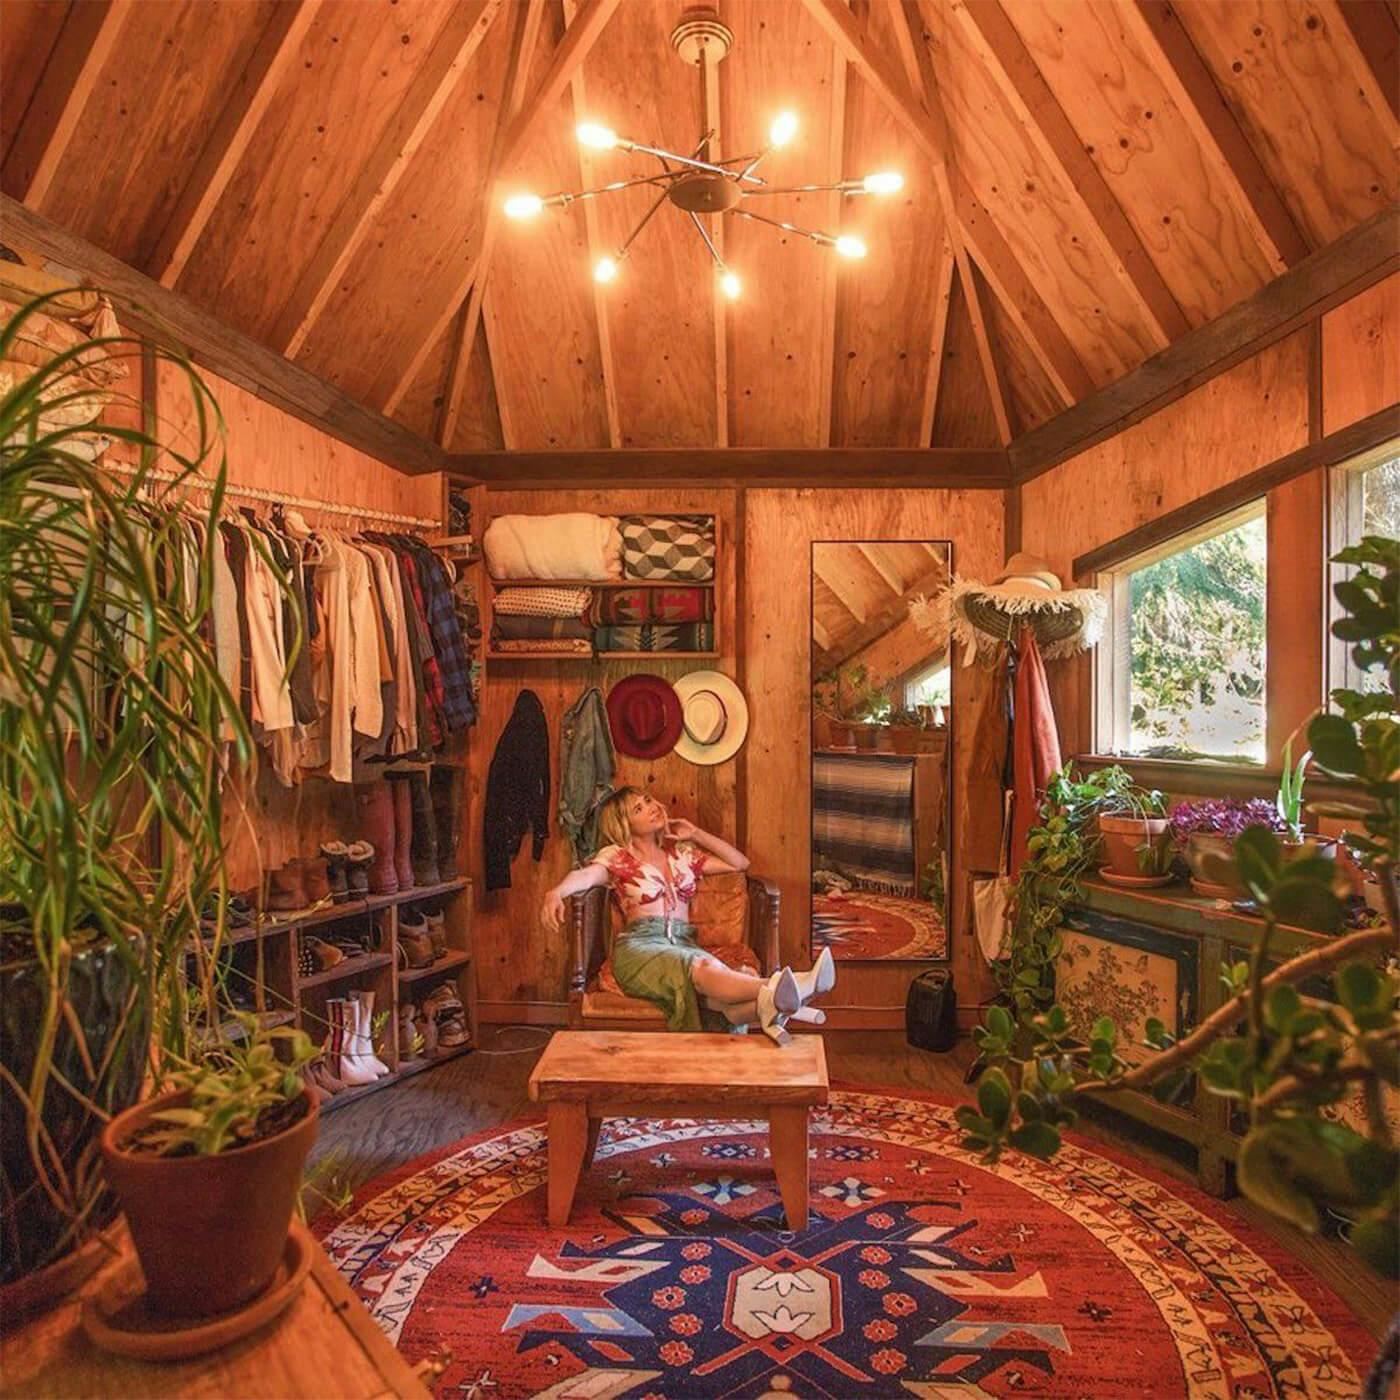 Jacob Witzling Instagram image of a rustic cabin walk in closet with warm glow from hanging chandelier